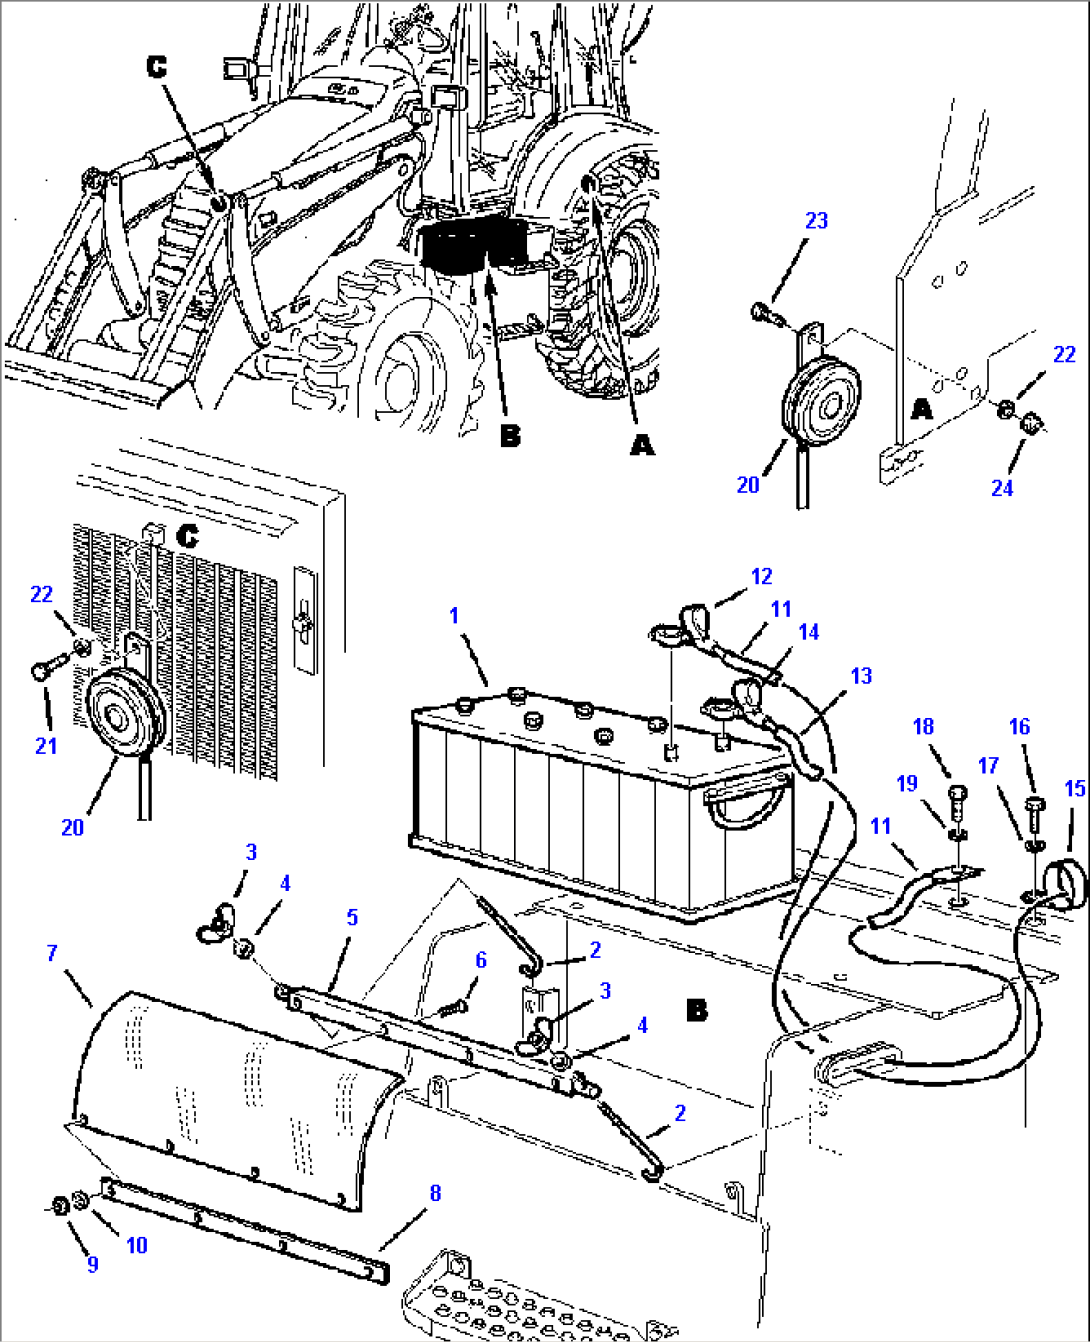 FIG. E1501-01A4 ELECTRICAL SYSTEM - BATTERY AND HORNS